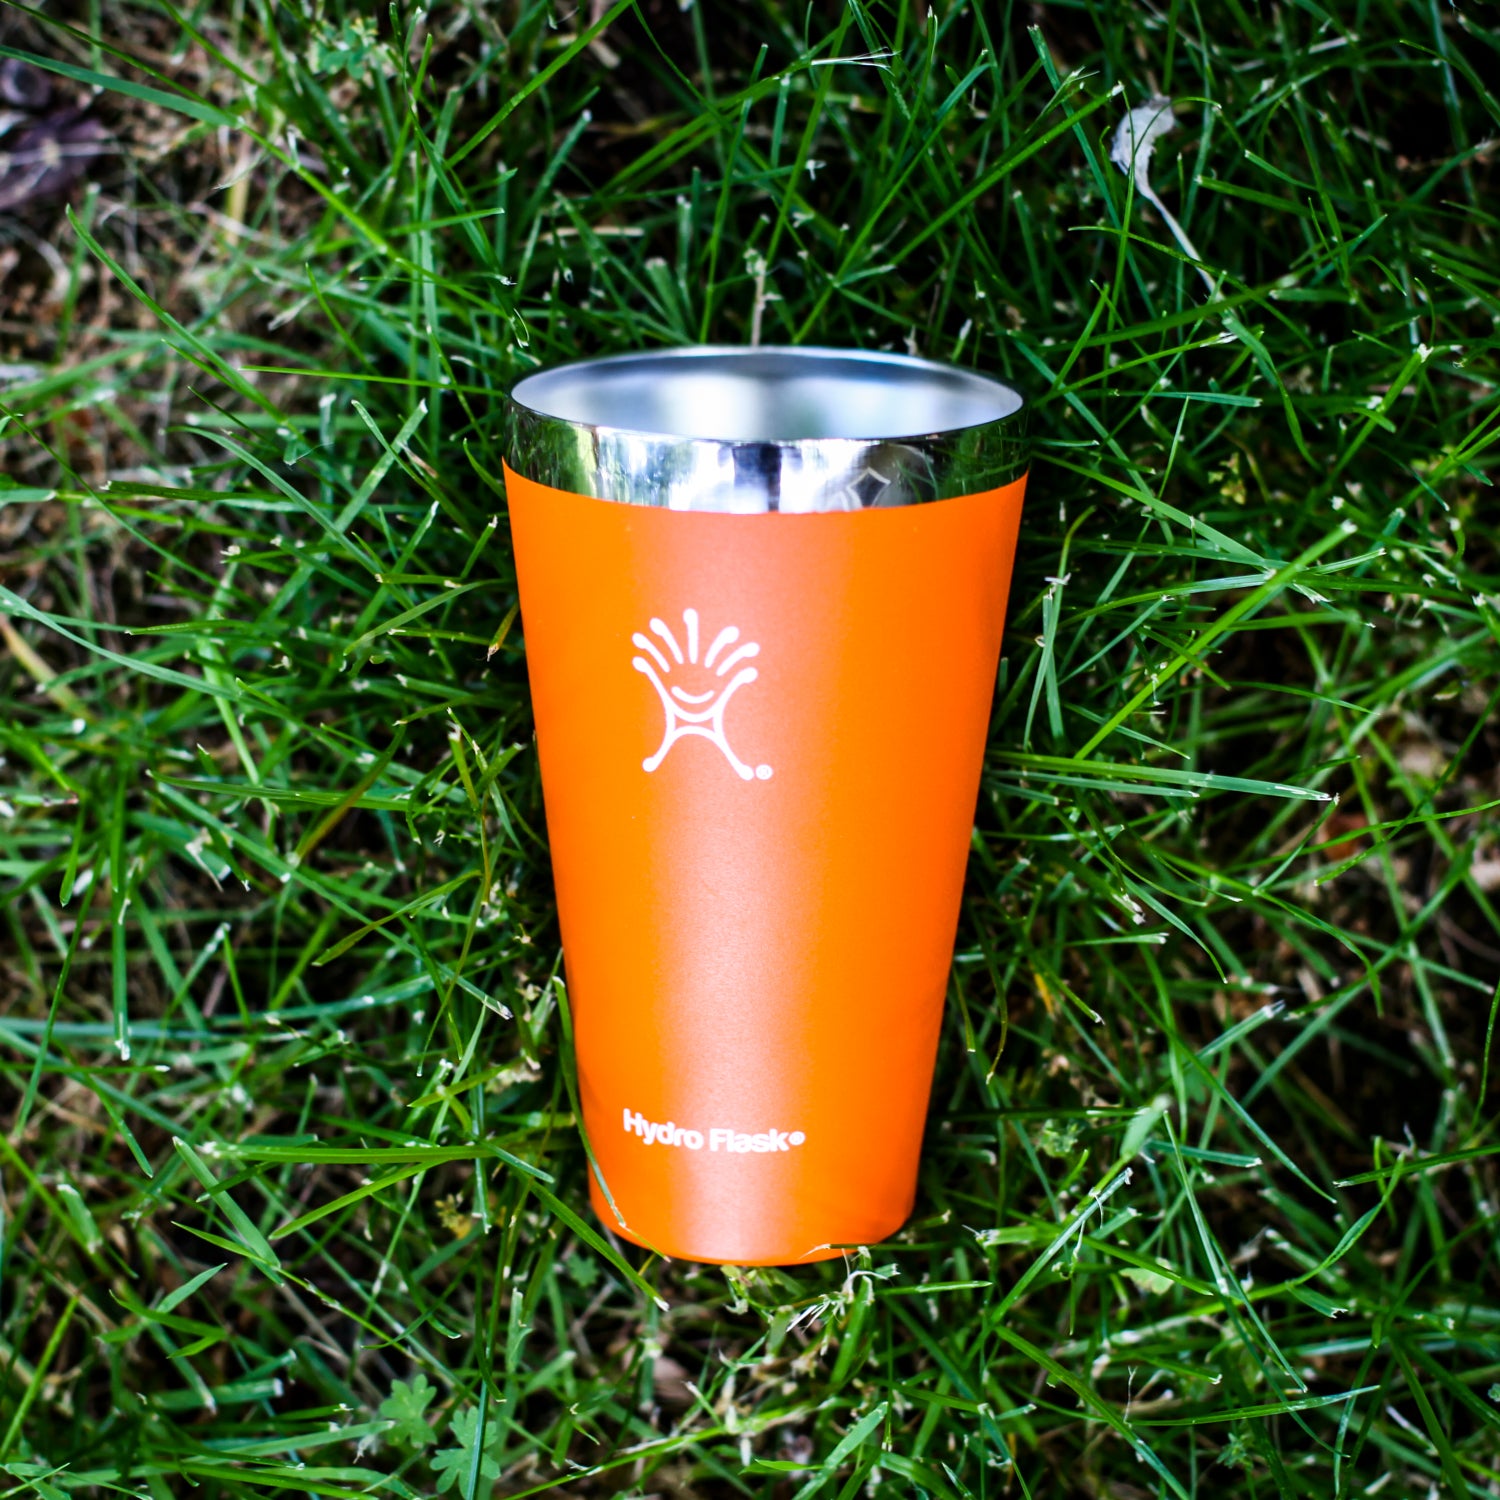 Hydro Flask 16oz True Pint Stainless Steel Tumbler - First